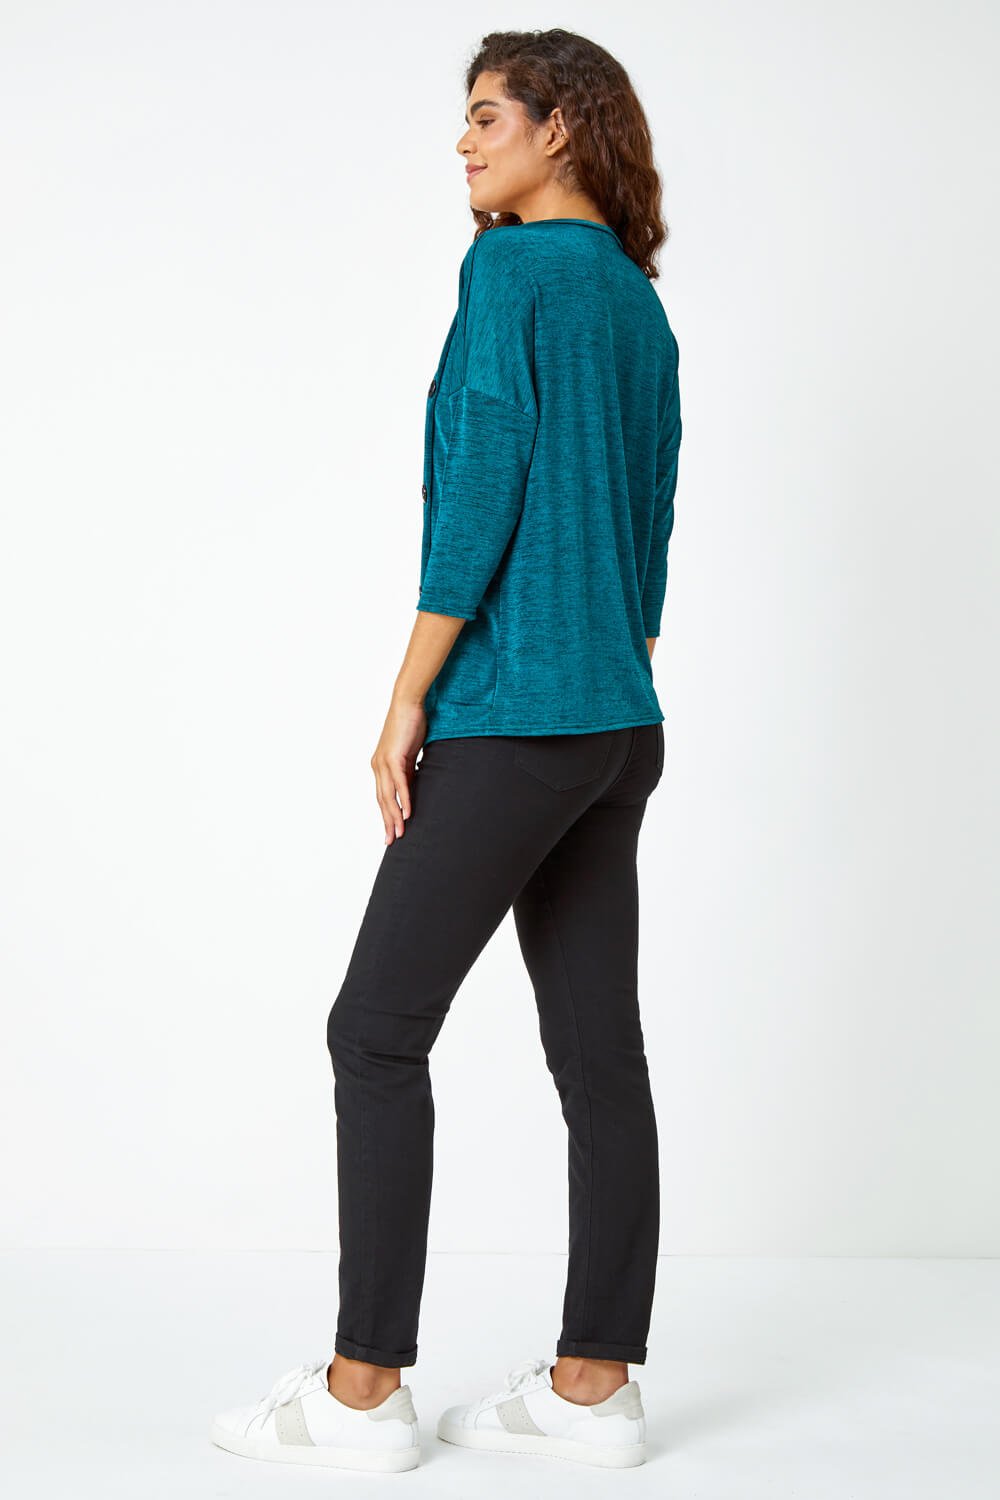 Teal Button Detail Marl Stretch Top, Image 3 of 5